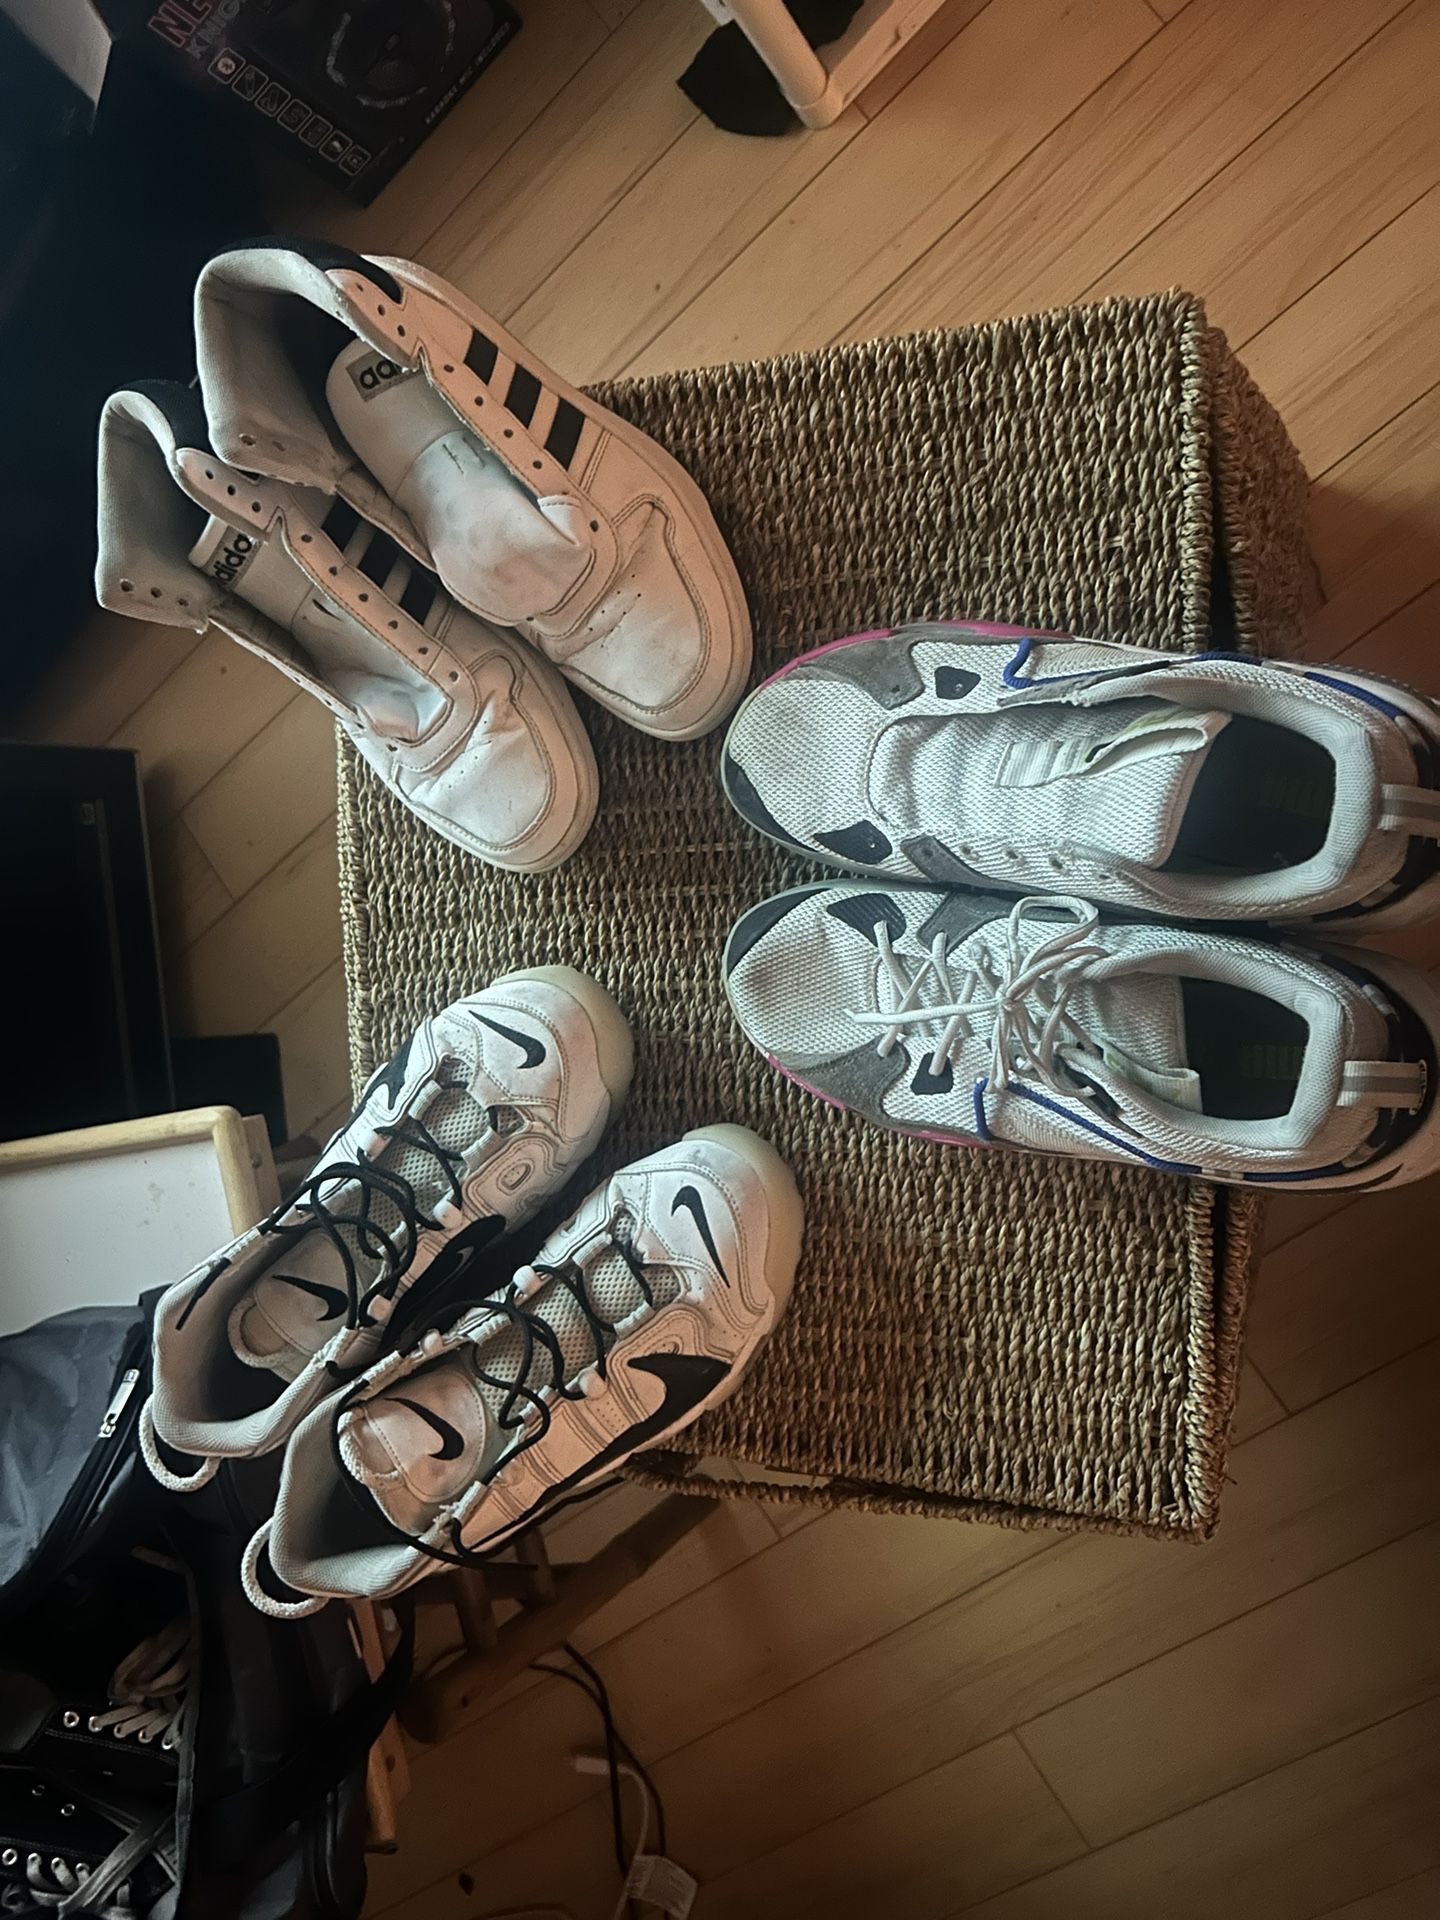 3 Pair Of Size 11 Sneakers 